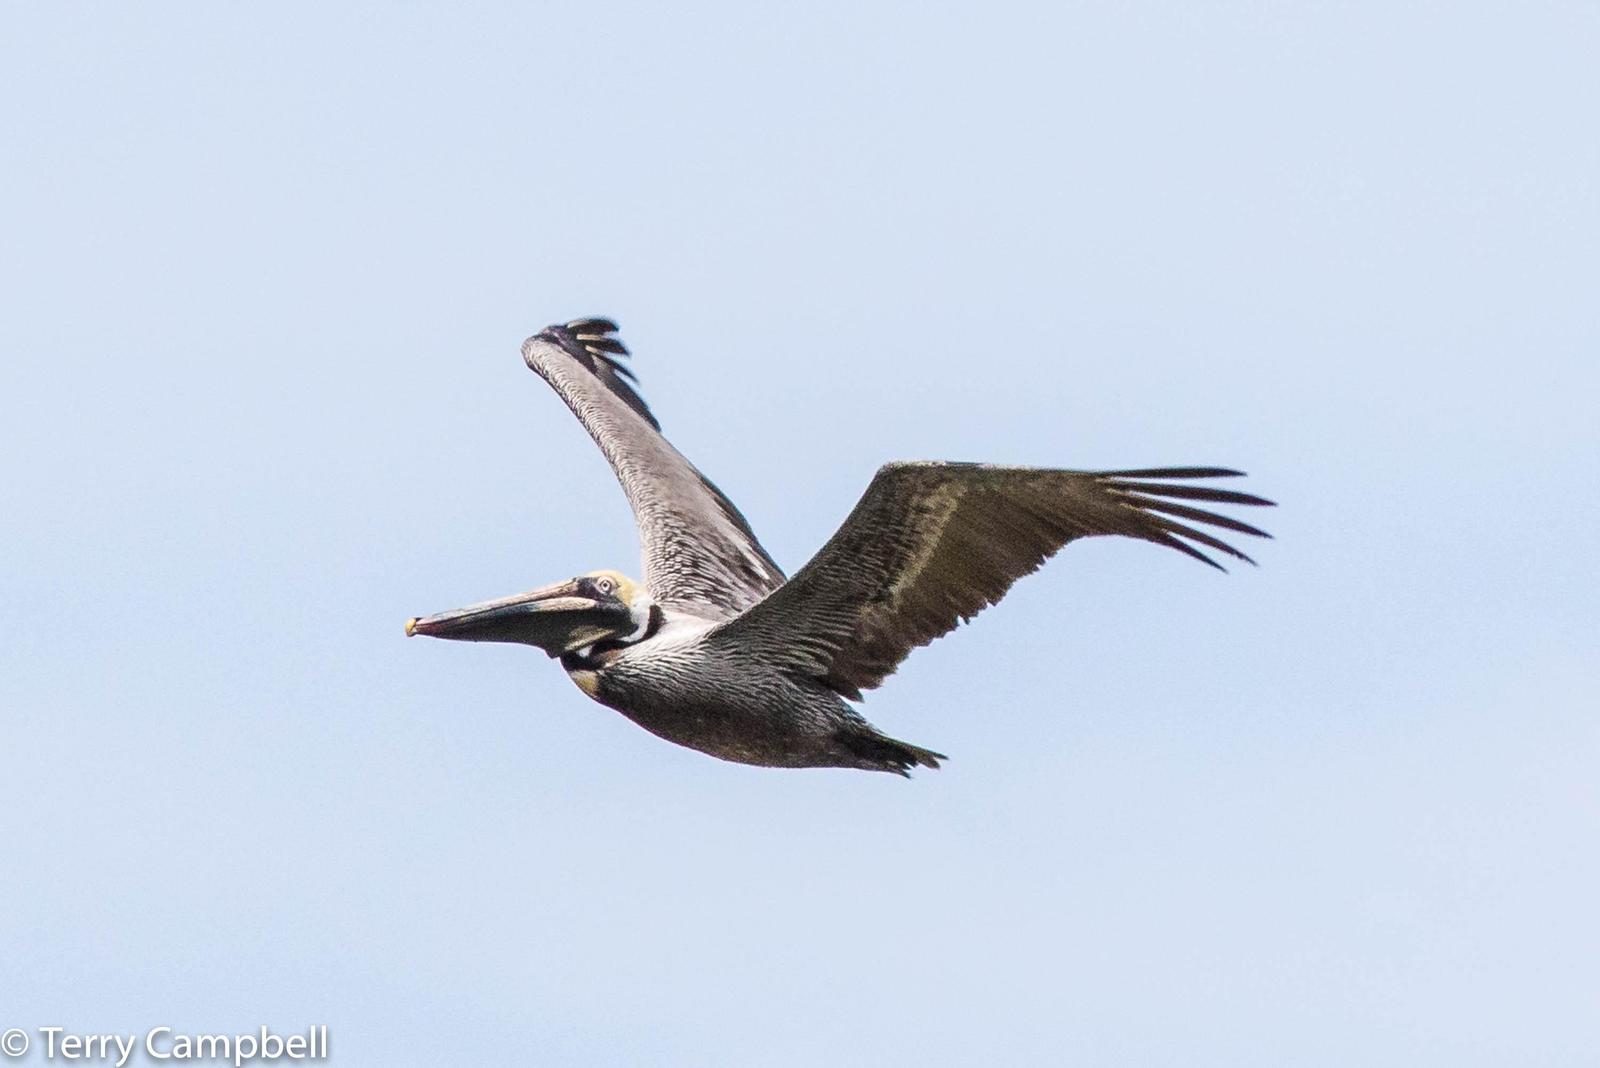 Brown Pelican Photo by Terry Campbell